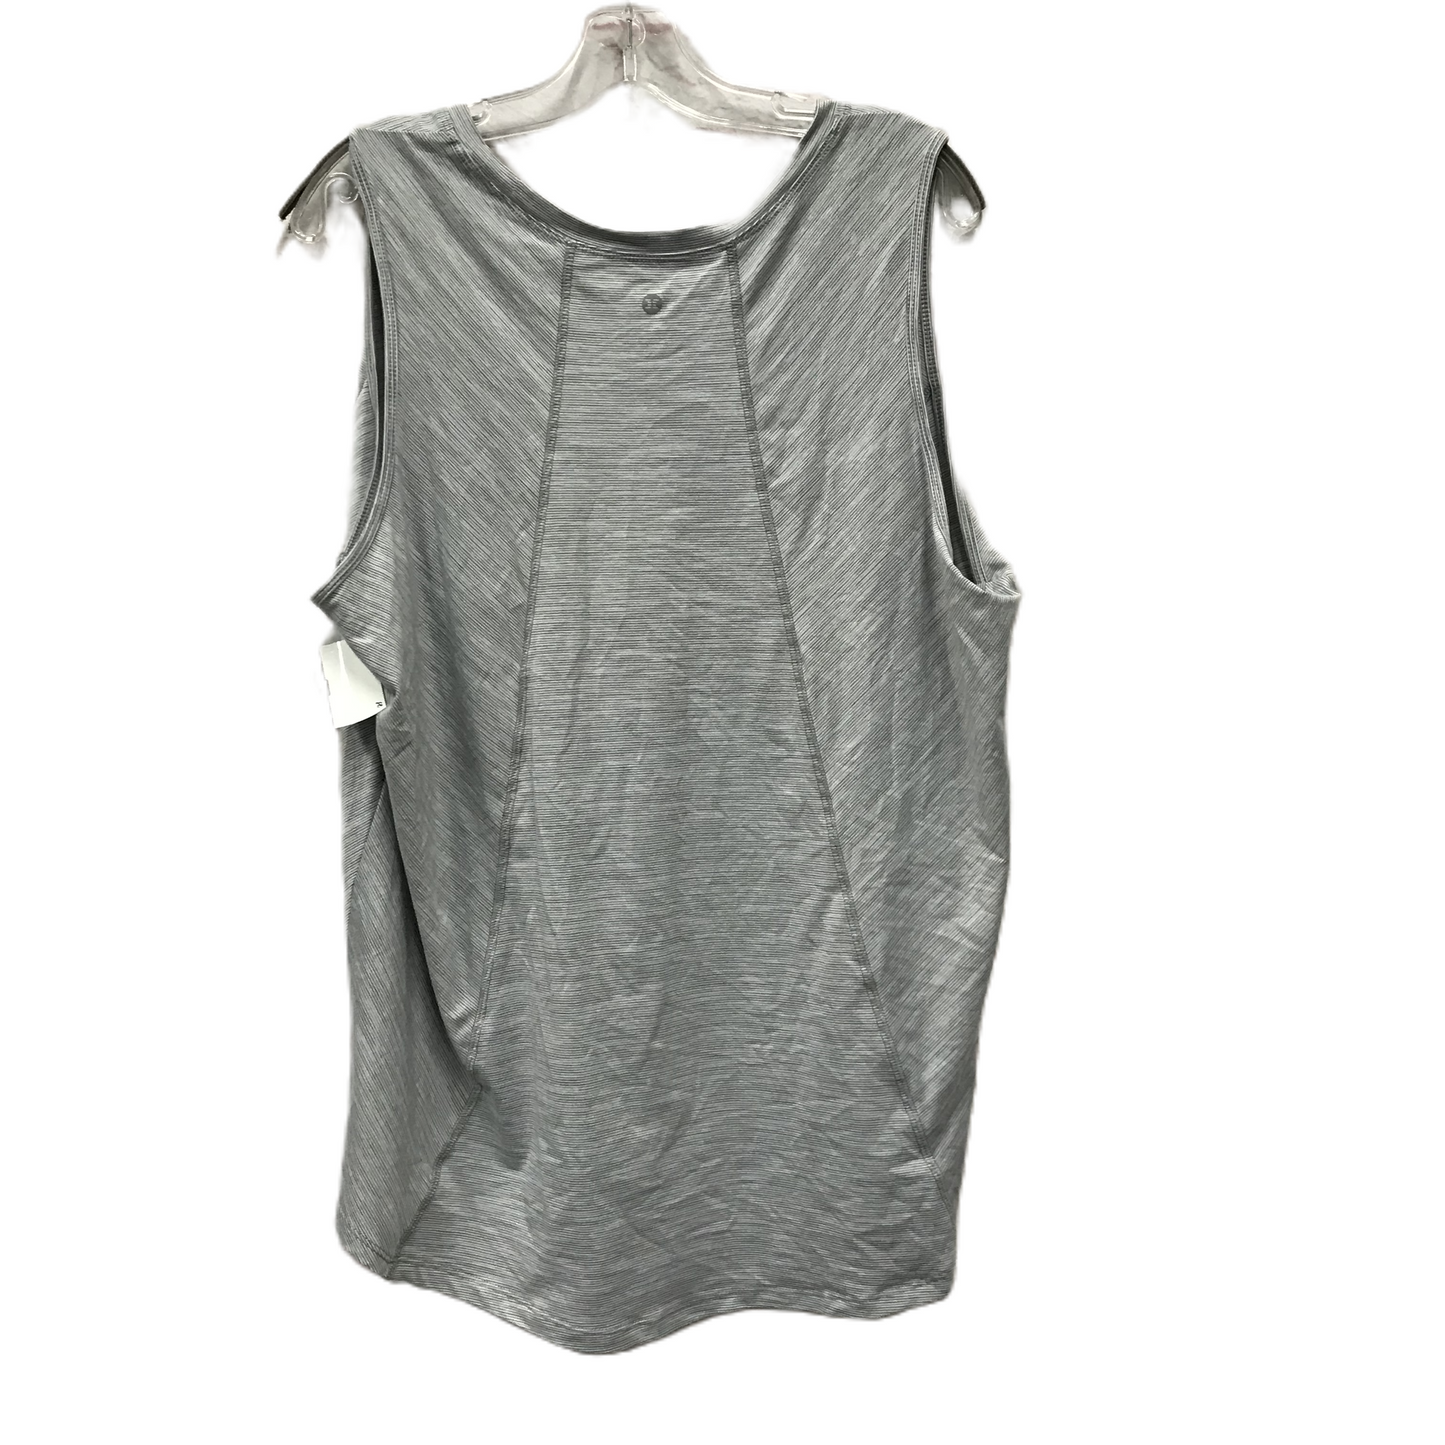 Grey Athletic Top Short Sleeve By Rbx, Size: 3x